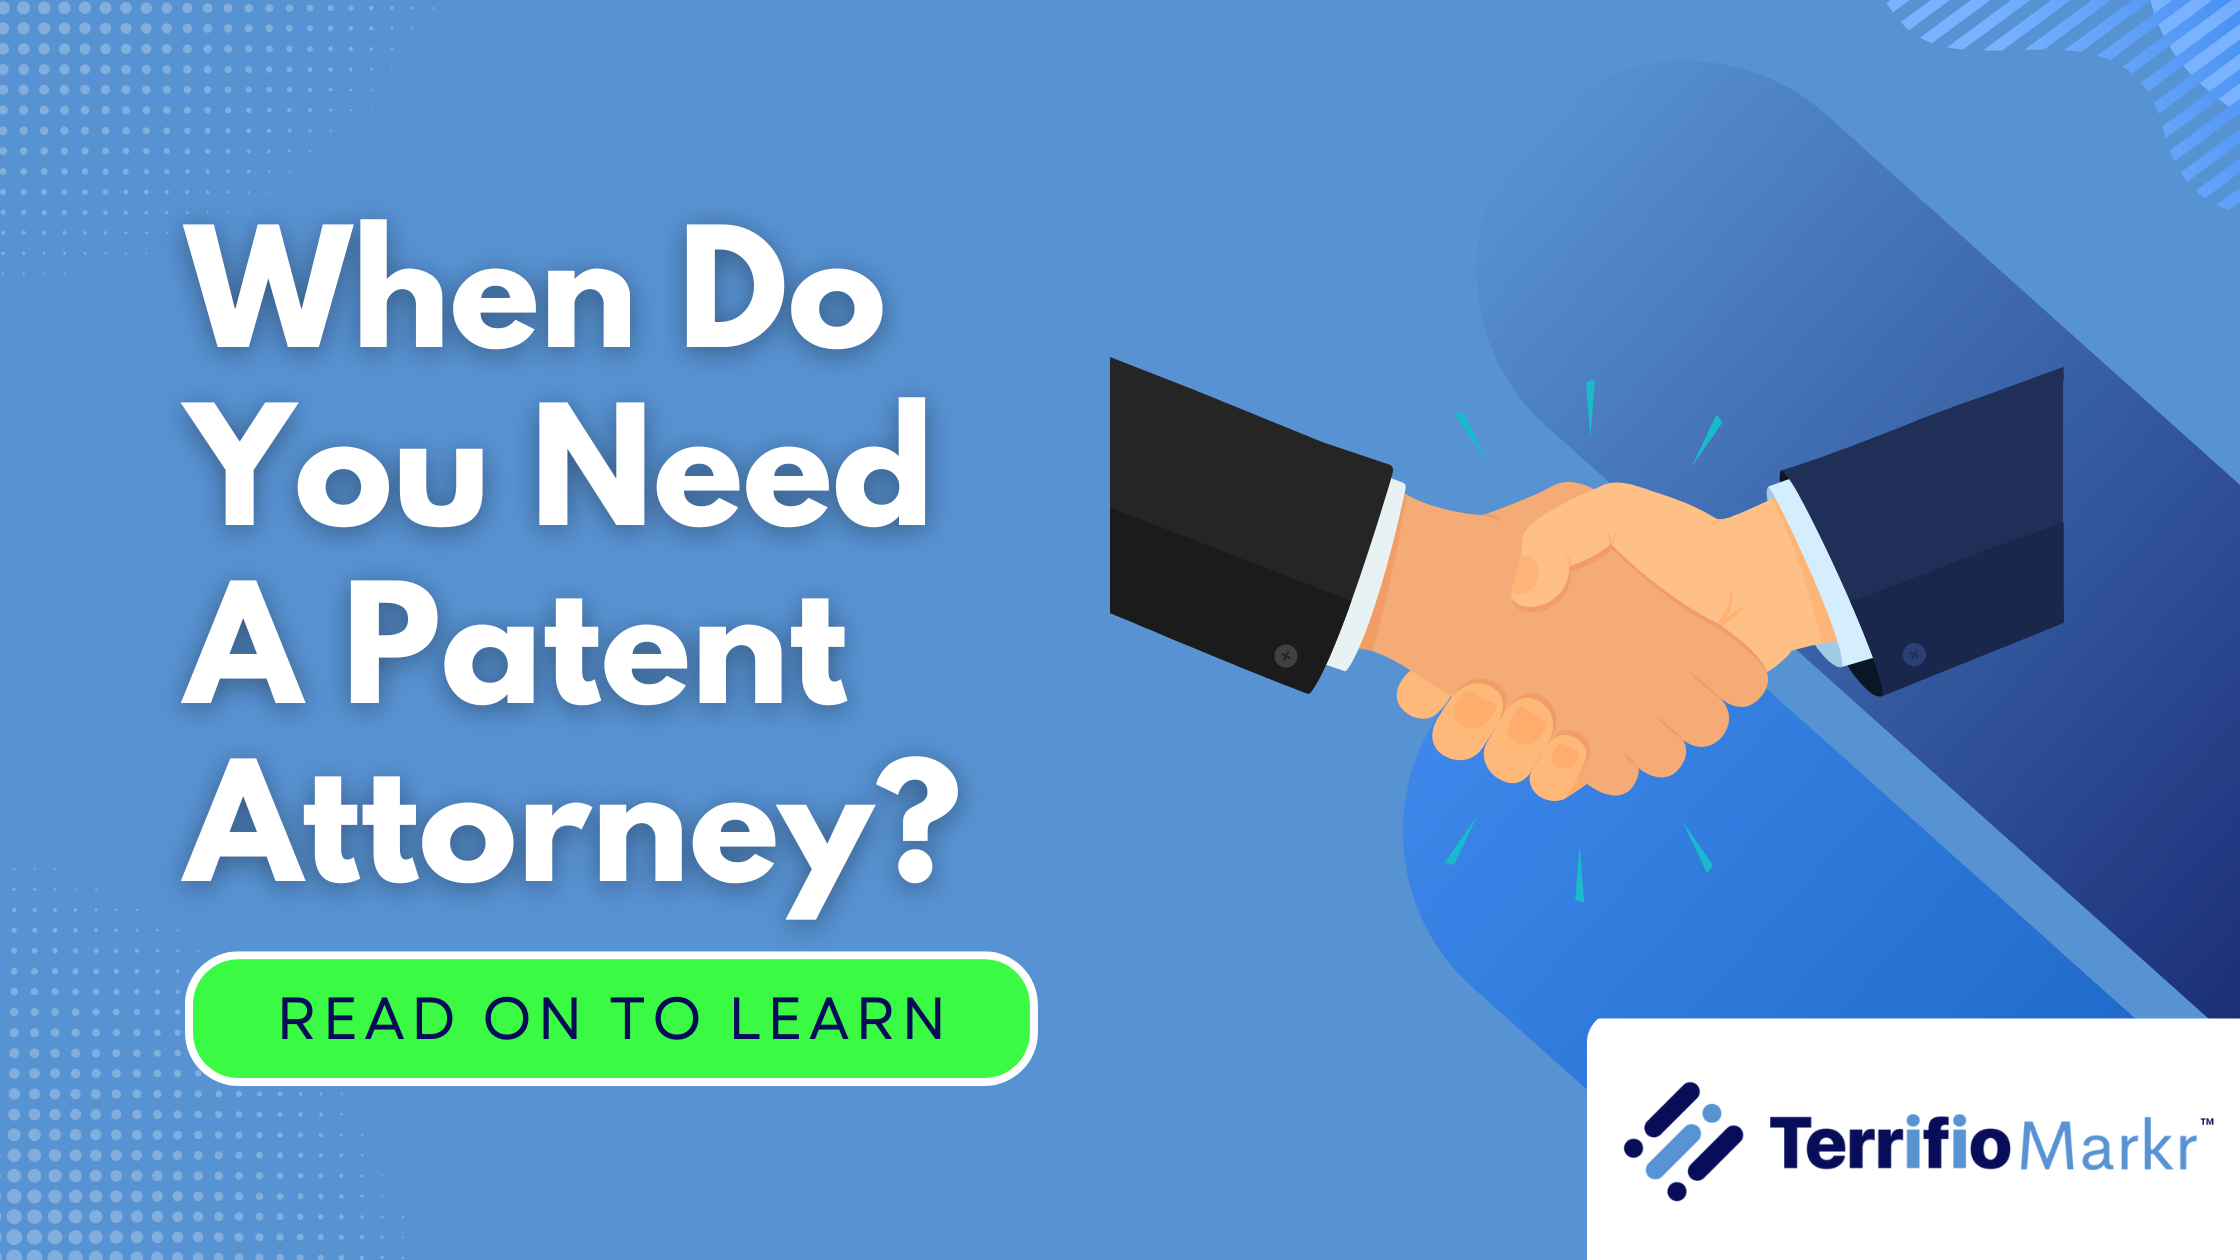 When Do You Need A Patent Attorney?